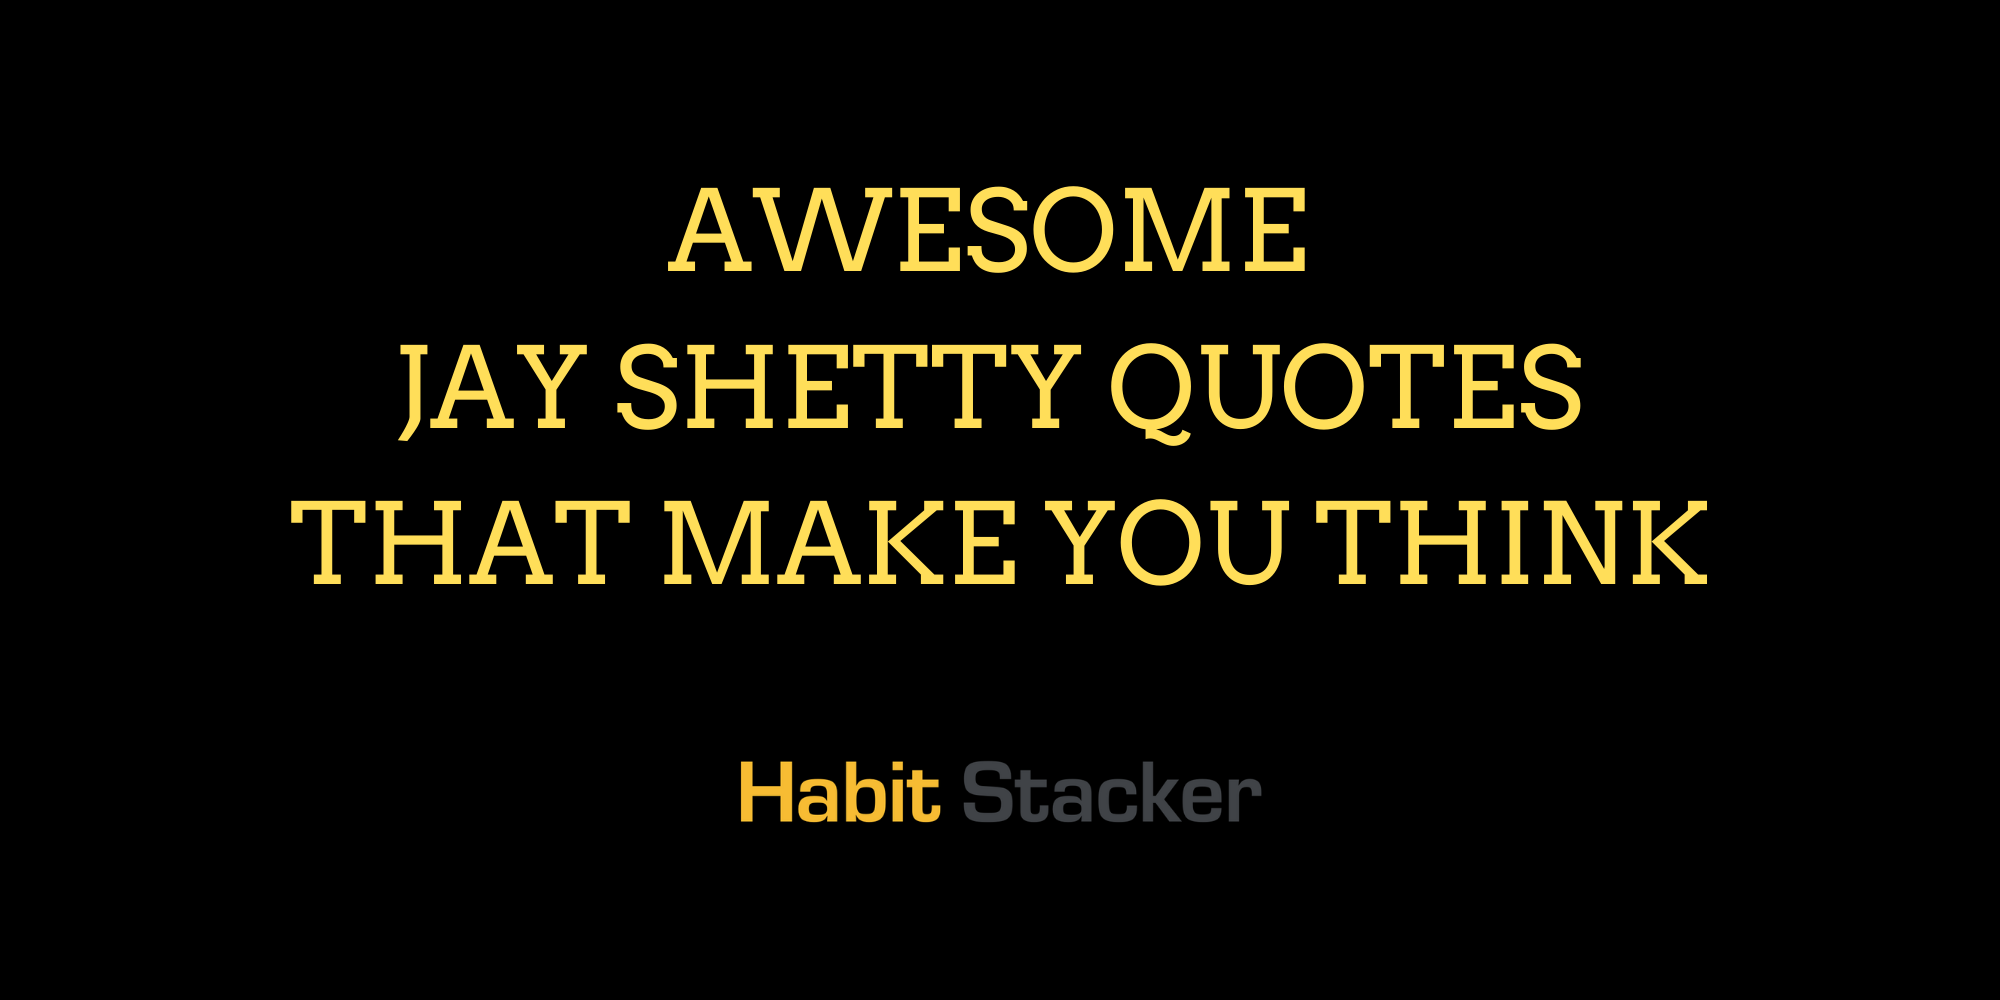 40 Awesome Jay Shetty Quotes that Make You Think - Habit Stacker